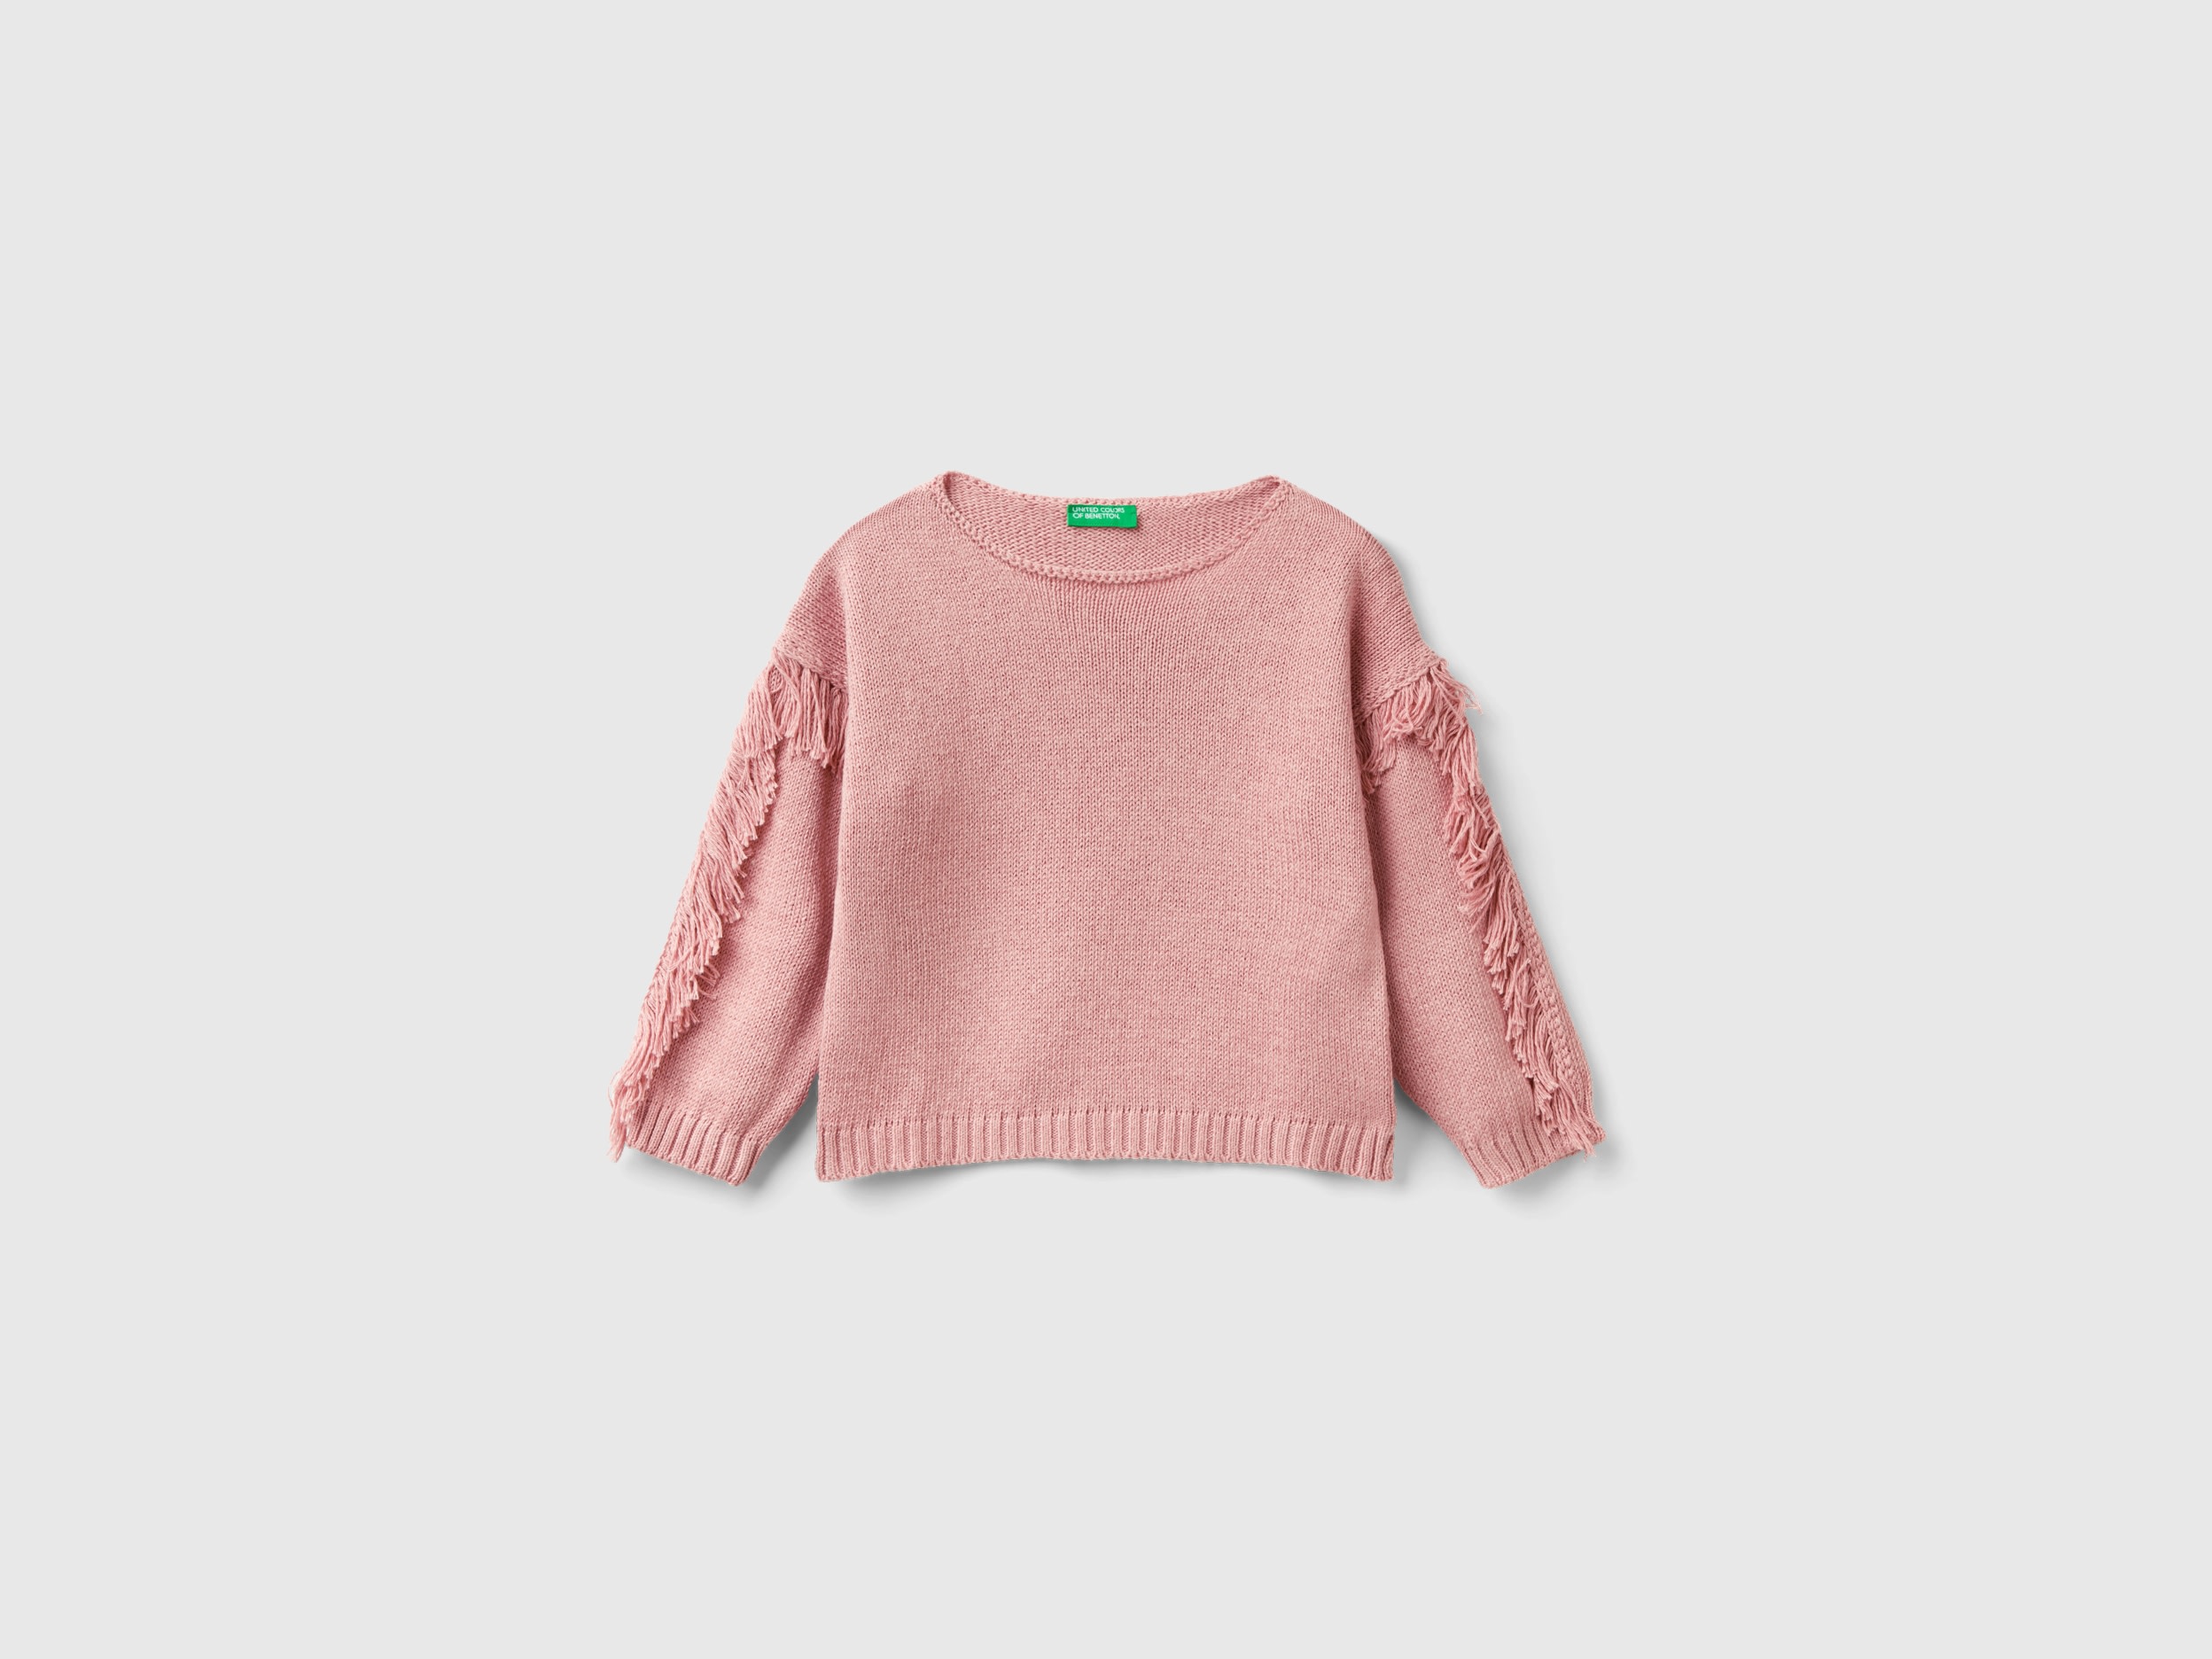 Image of Benetton, Sweater With Fringe, size 90, Pink, Kids